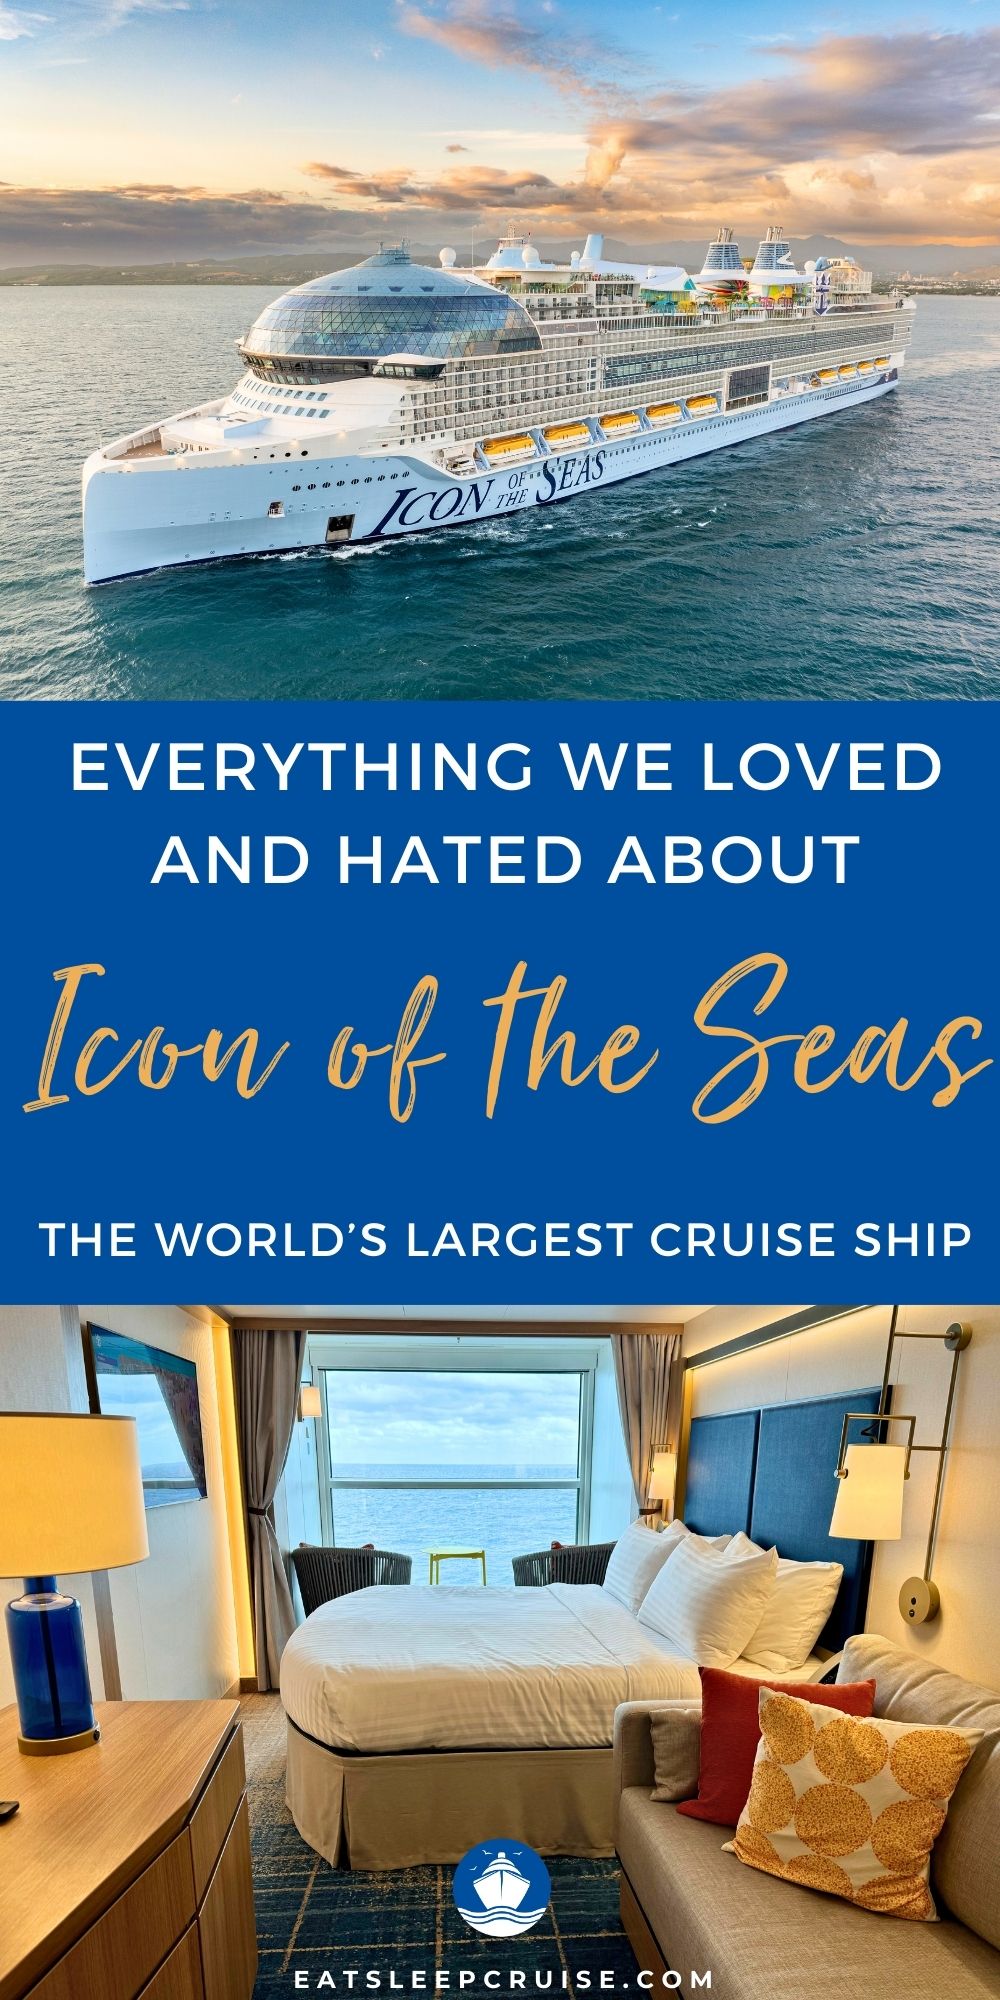 We watched all the shows, ate at all the restaurants, conquered all the rides, and share what we loved and hated about Icon of the Seas.